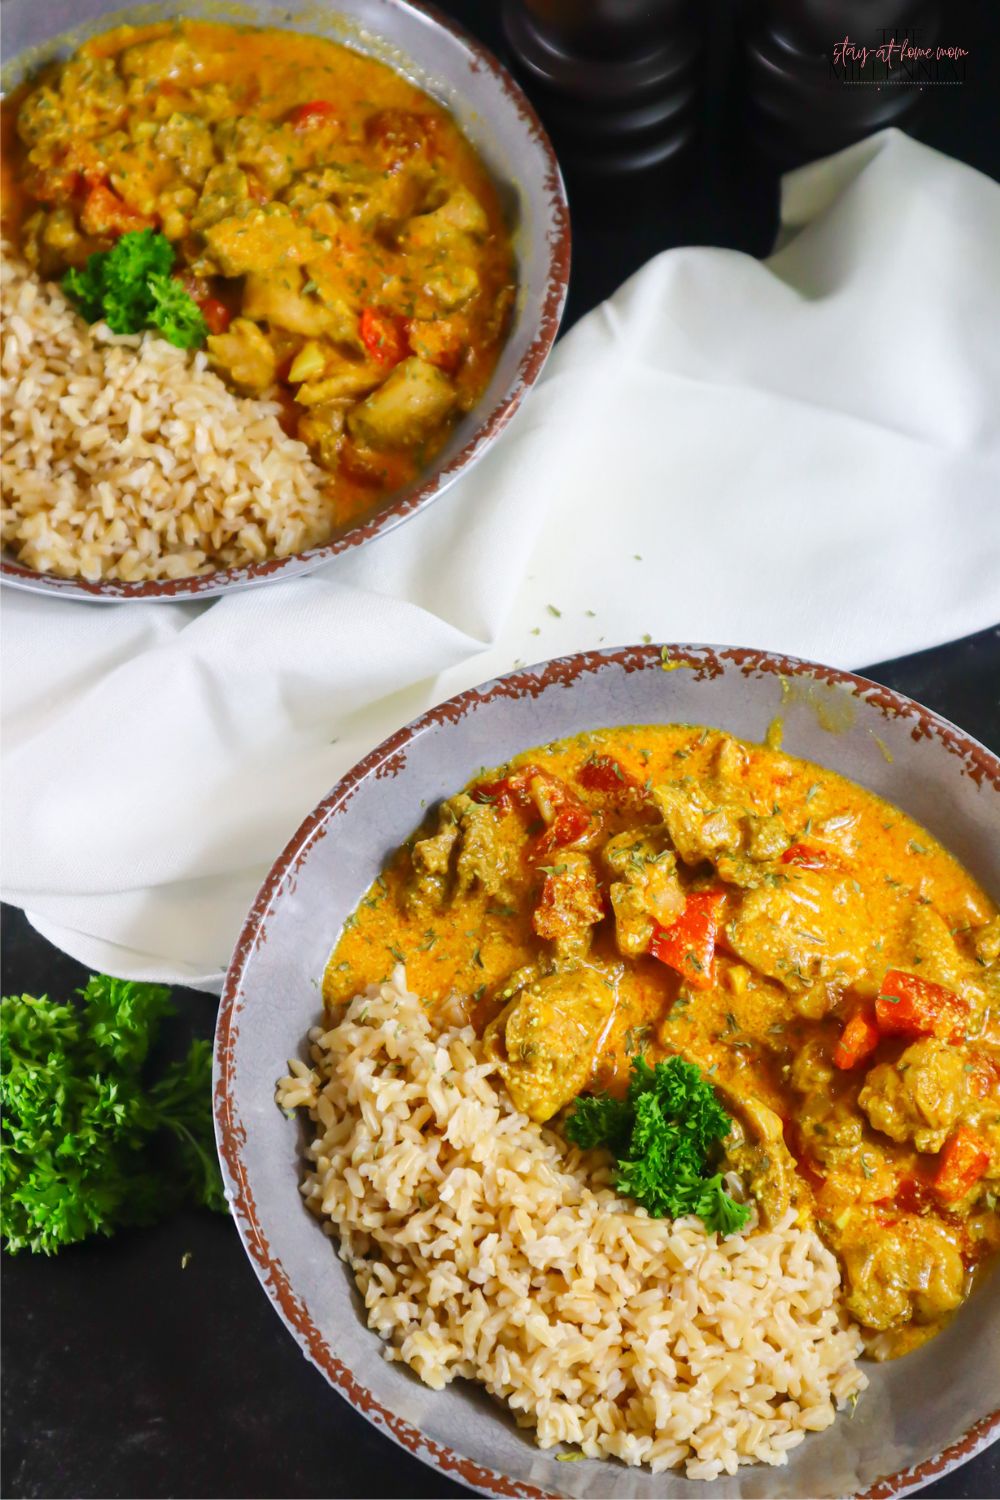 These delicious Coconut Curry Chicken Rice Bowls are rich in flavor and the perfect quick and easy dinner solution or meal prep idea!